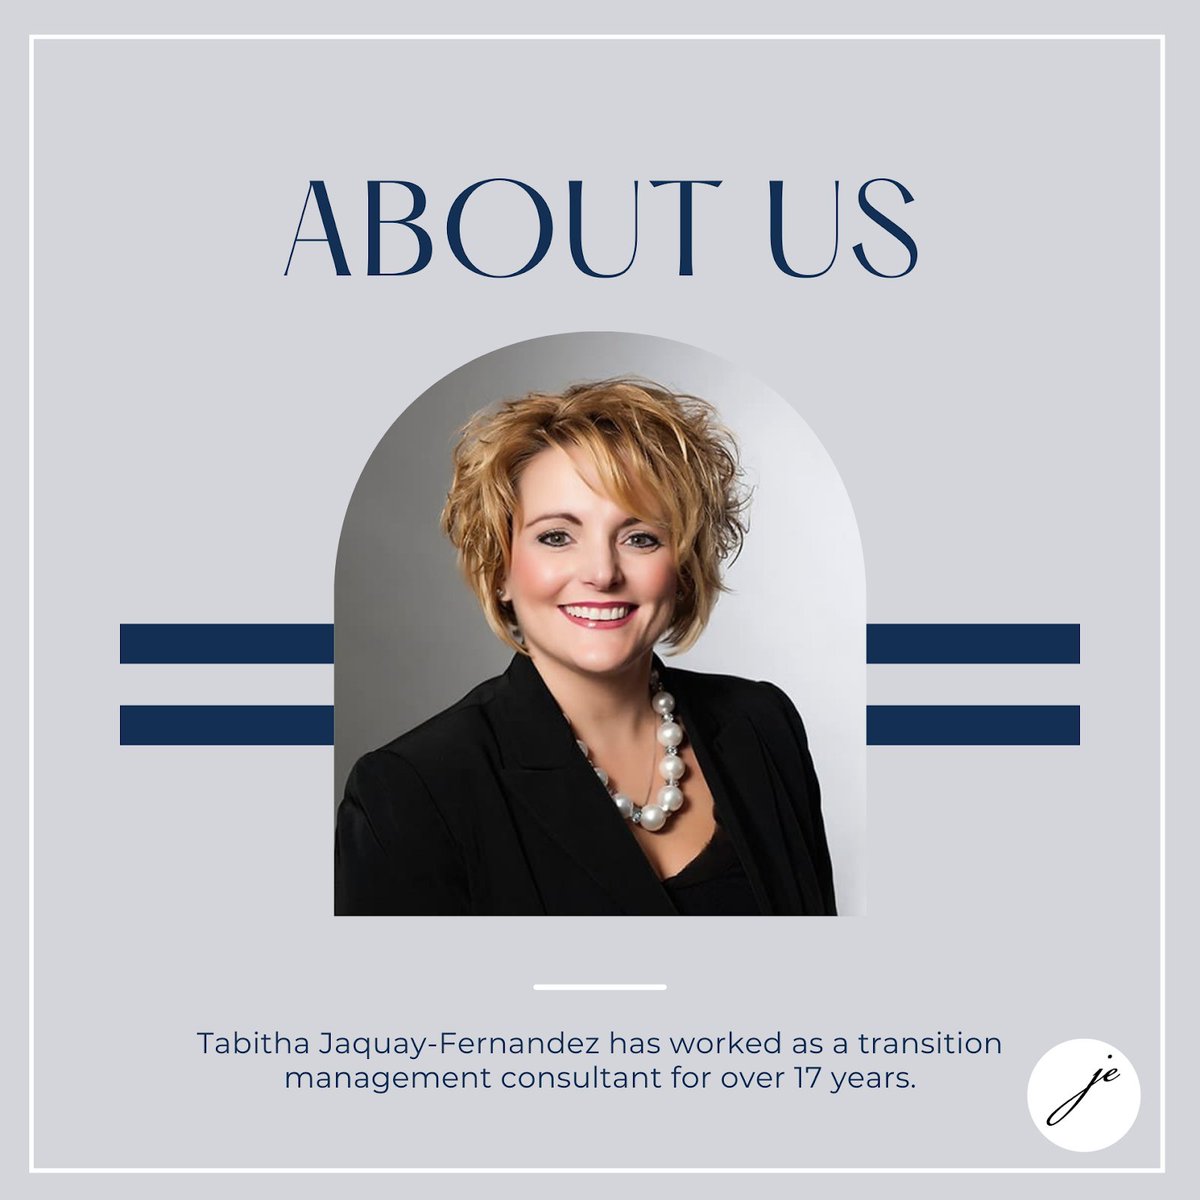 Meet the driving force behind Jaquay Enterprise – Tabitha Jaquay-Fernandez! With over 17 years of experience, she is the catalyst for your successful practice transition journey.

#JaquayEnterprise #TransitionAdvisor #MeetTheTeam #TransitionExpert #TransitionPro